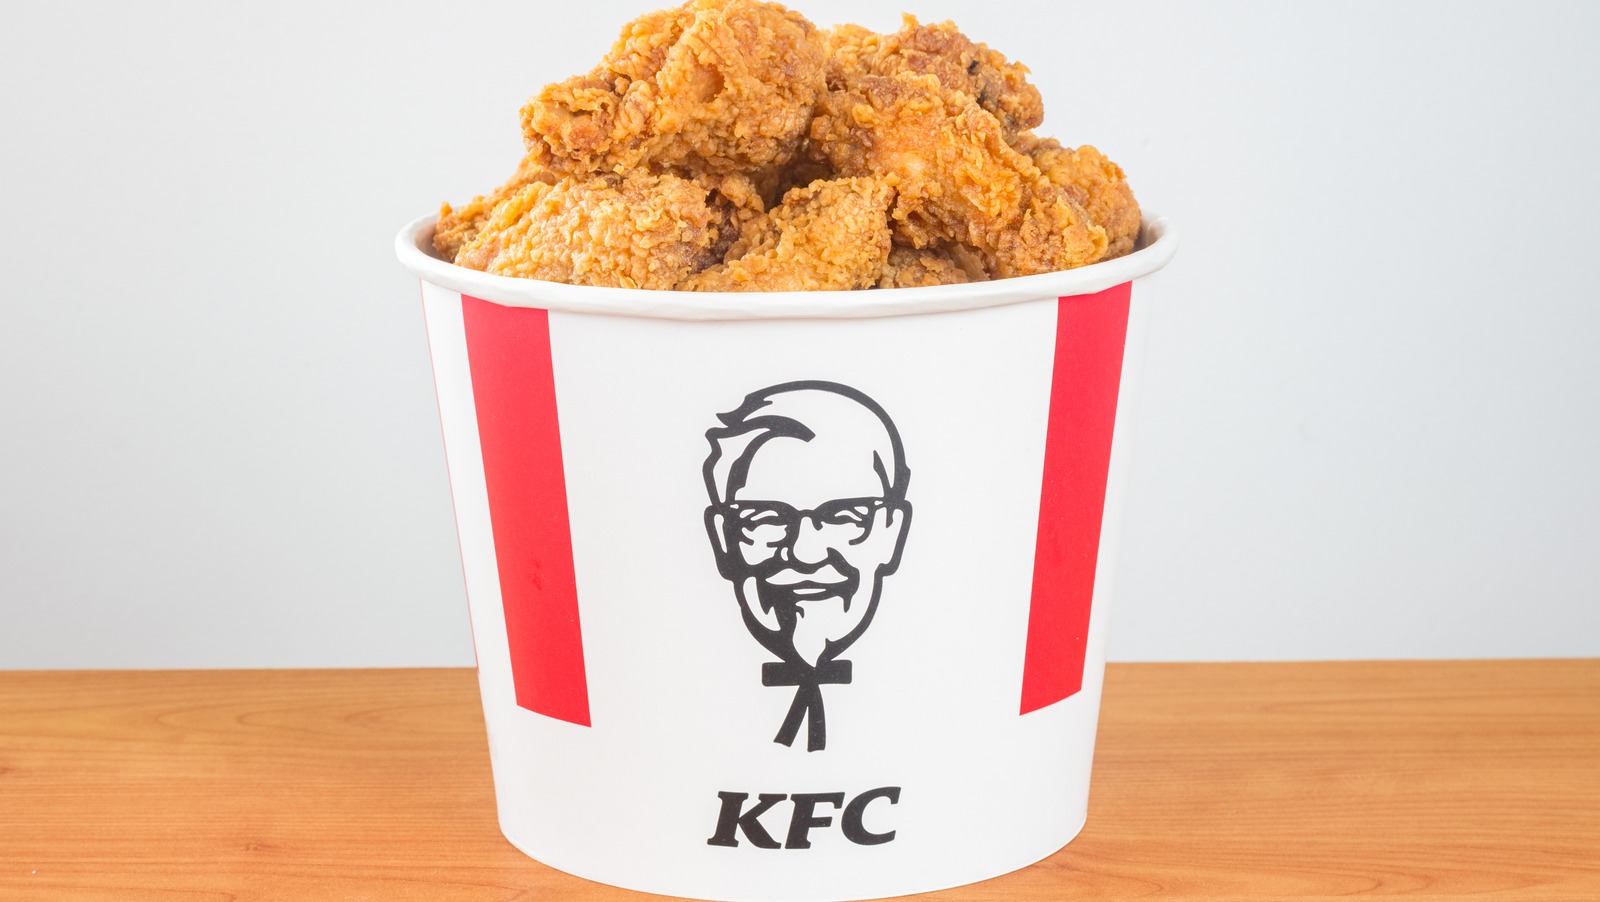 The Hilarious Way A TikToker Responded To Getting Sued By KFC